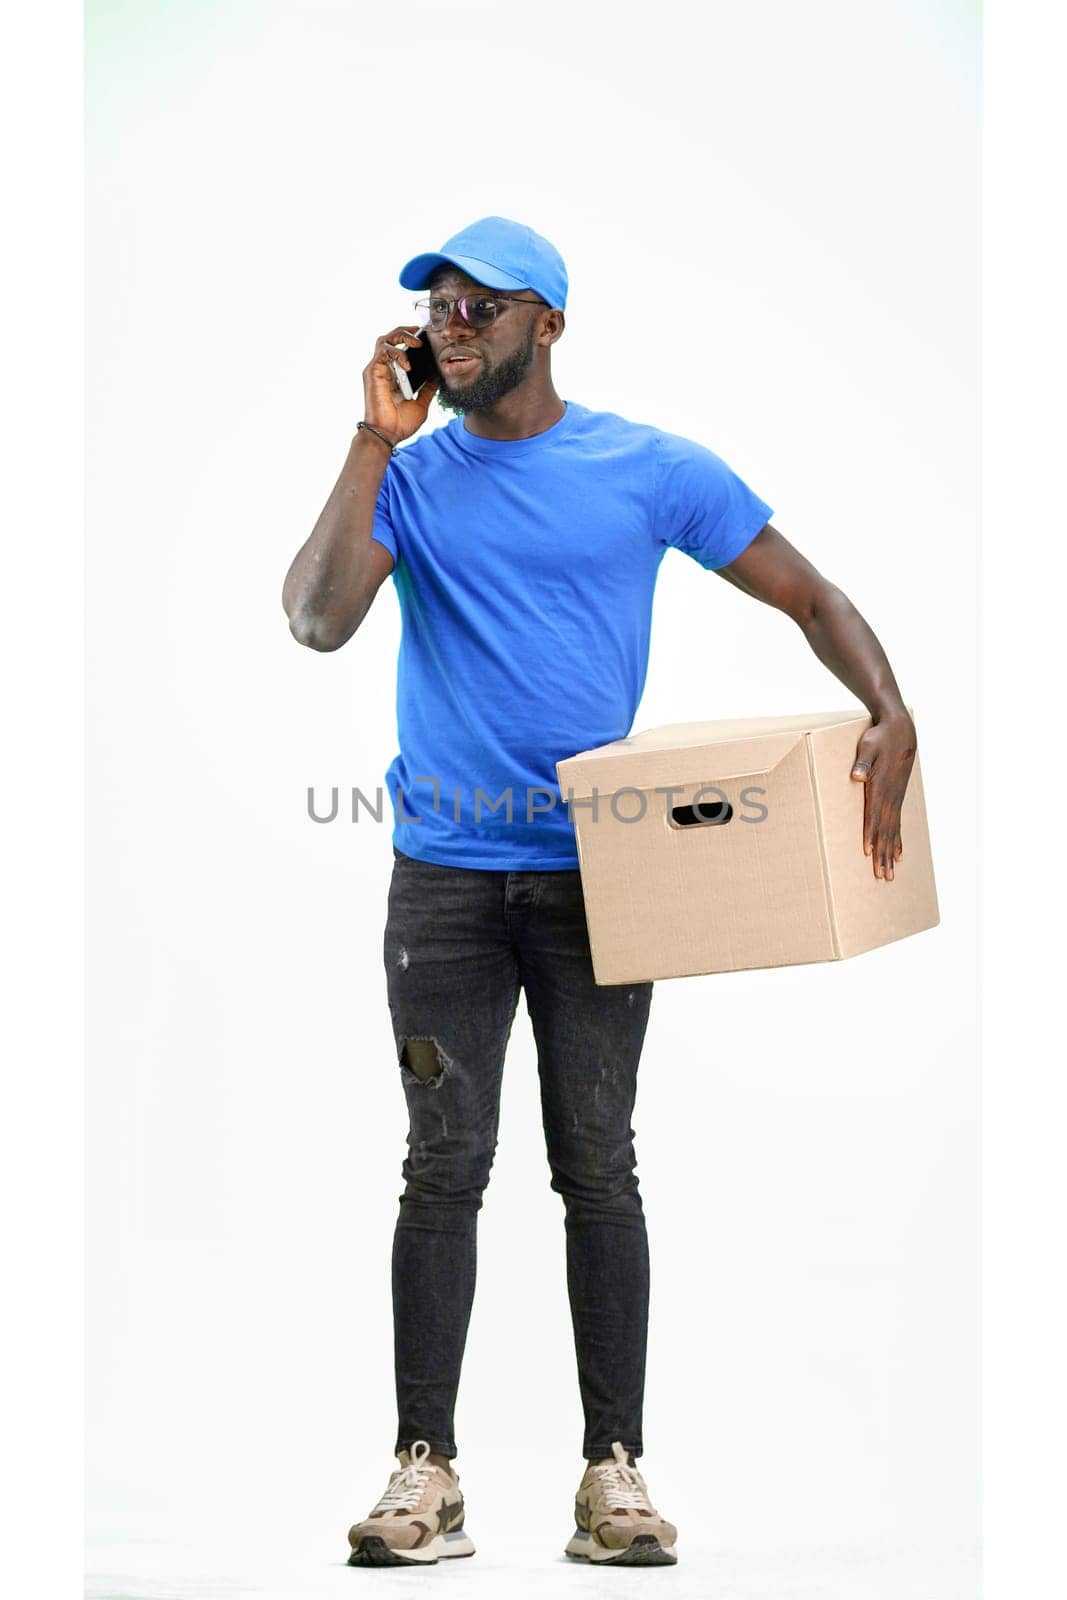 The deliveryman, in full height, on a white background, talking on the phone.